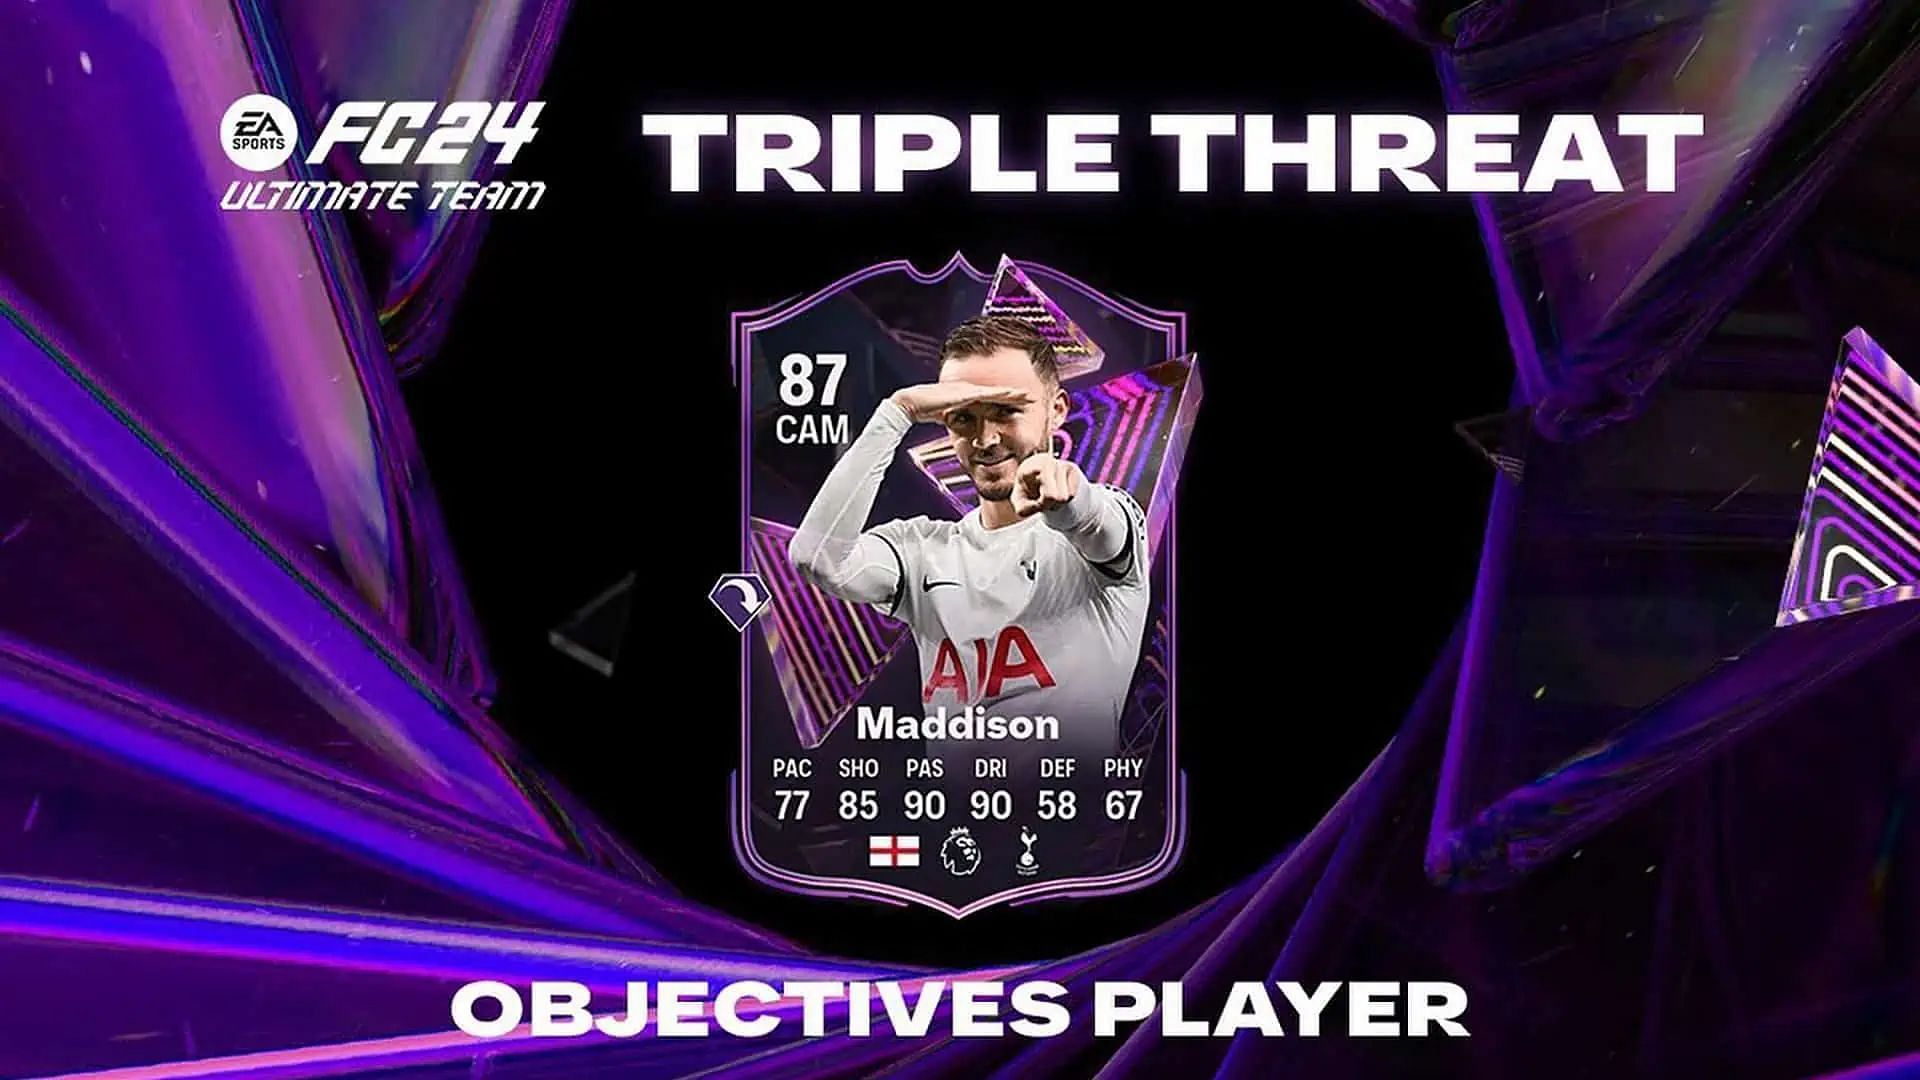 The Triple Threat Chase requires you to use cards like James Maddison